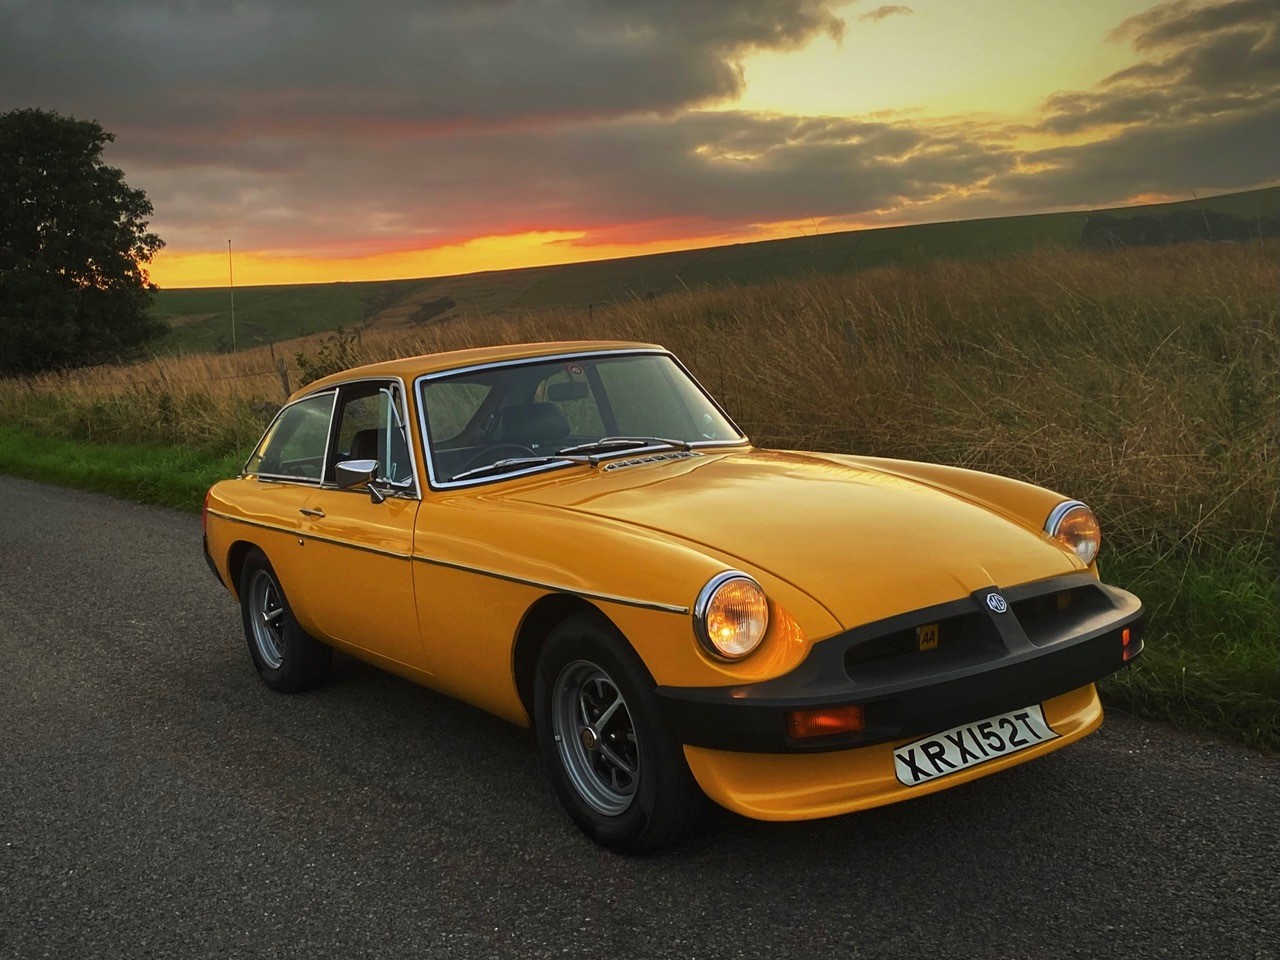 A Classic Car for Autumn Driving